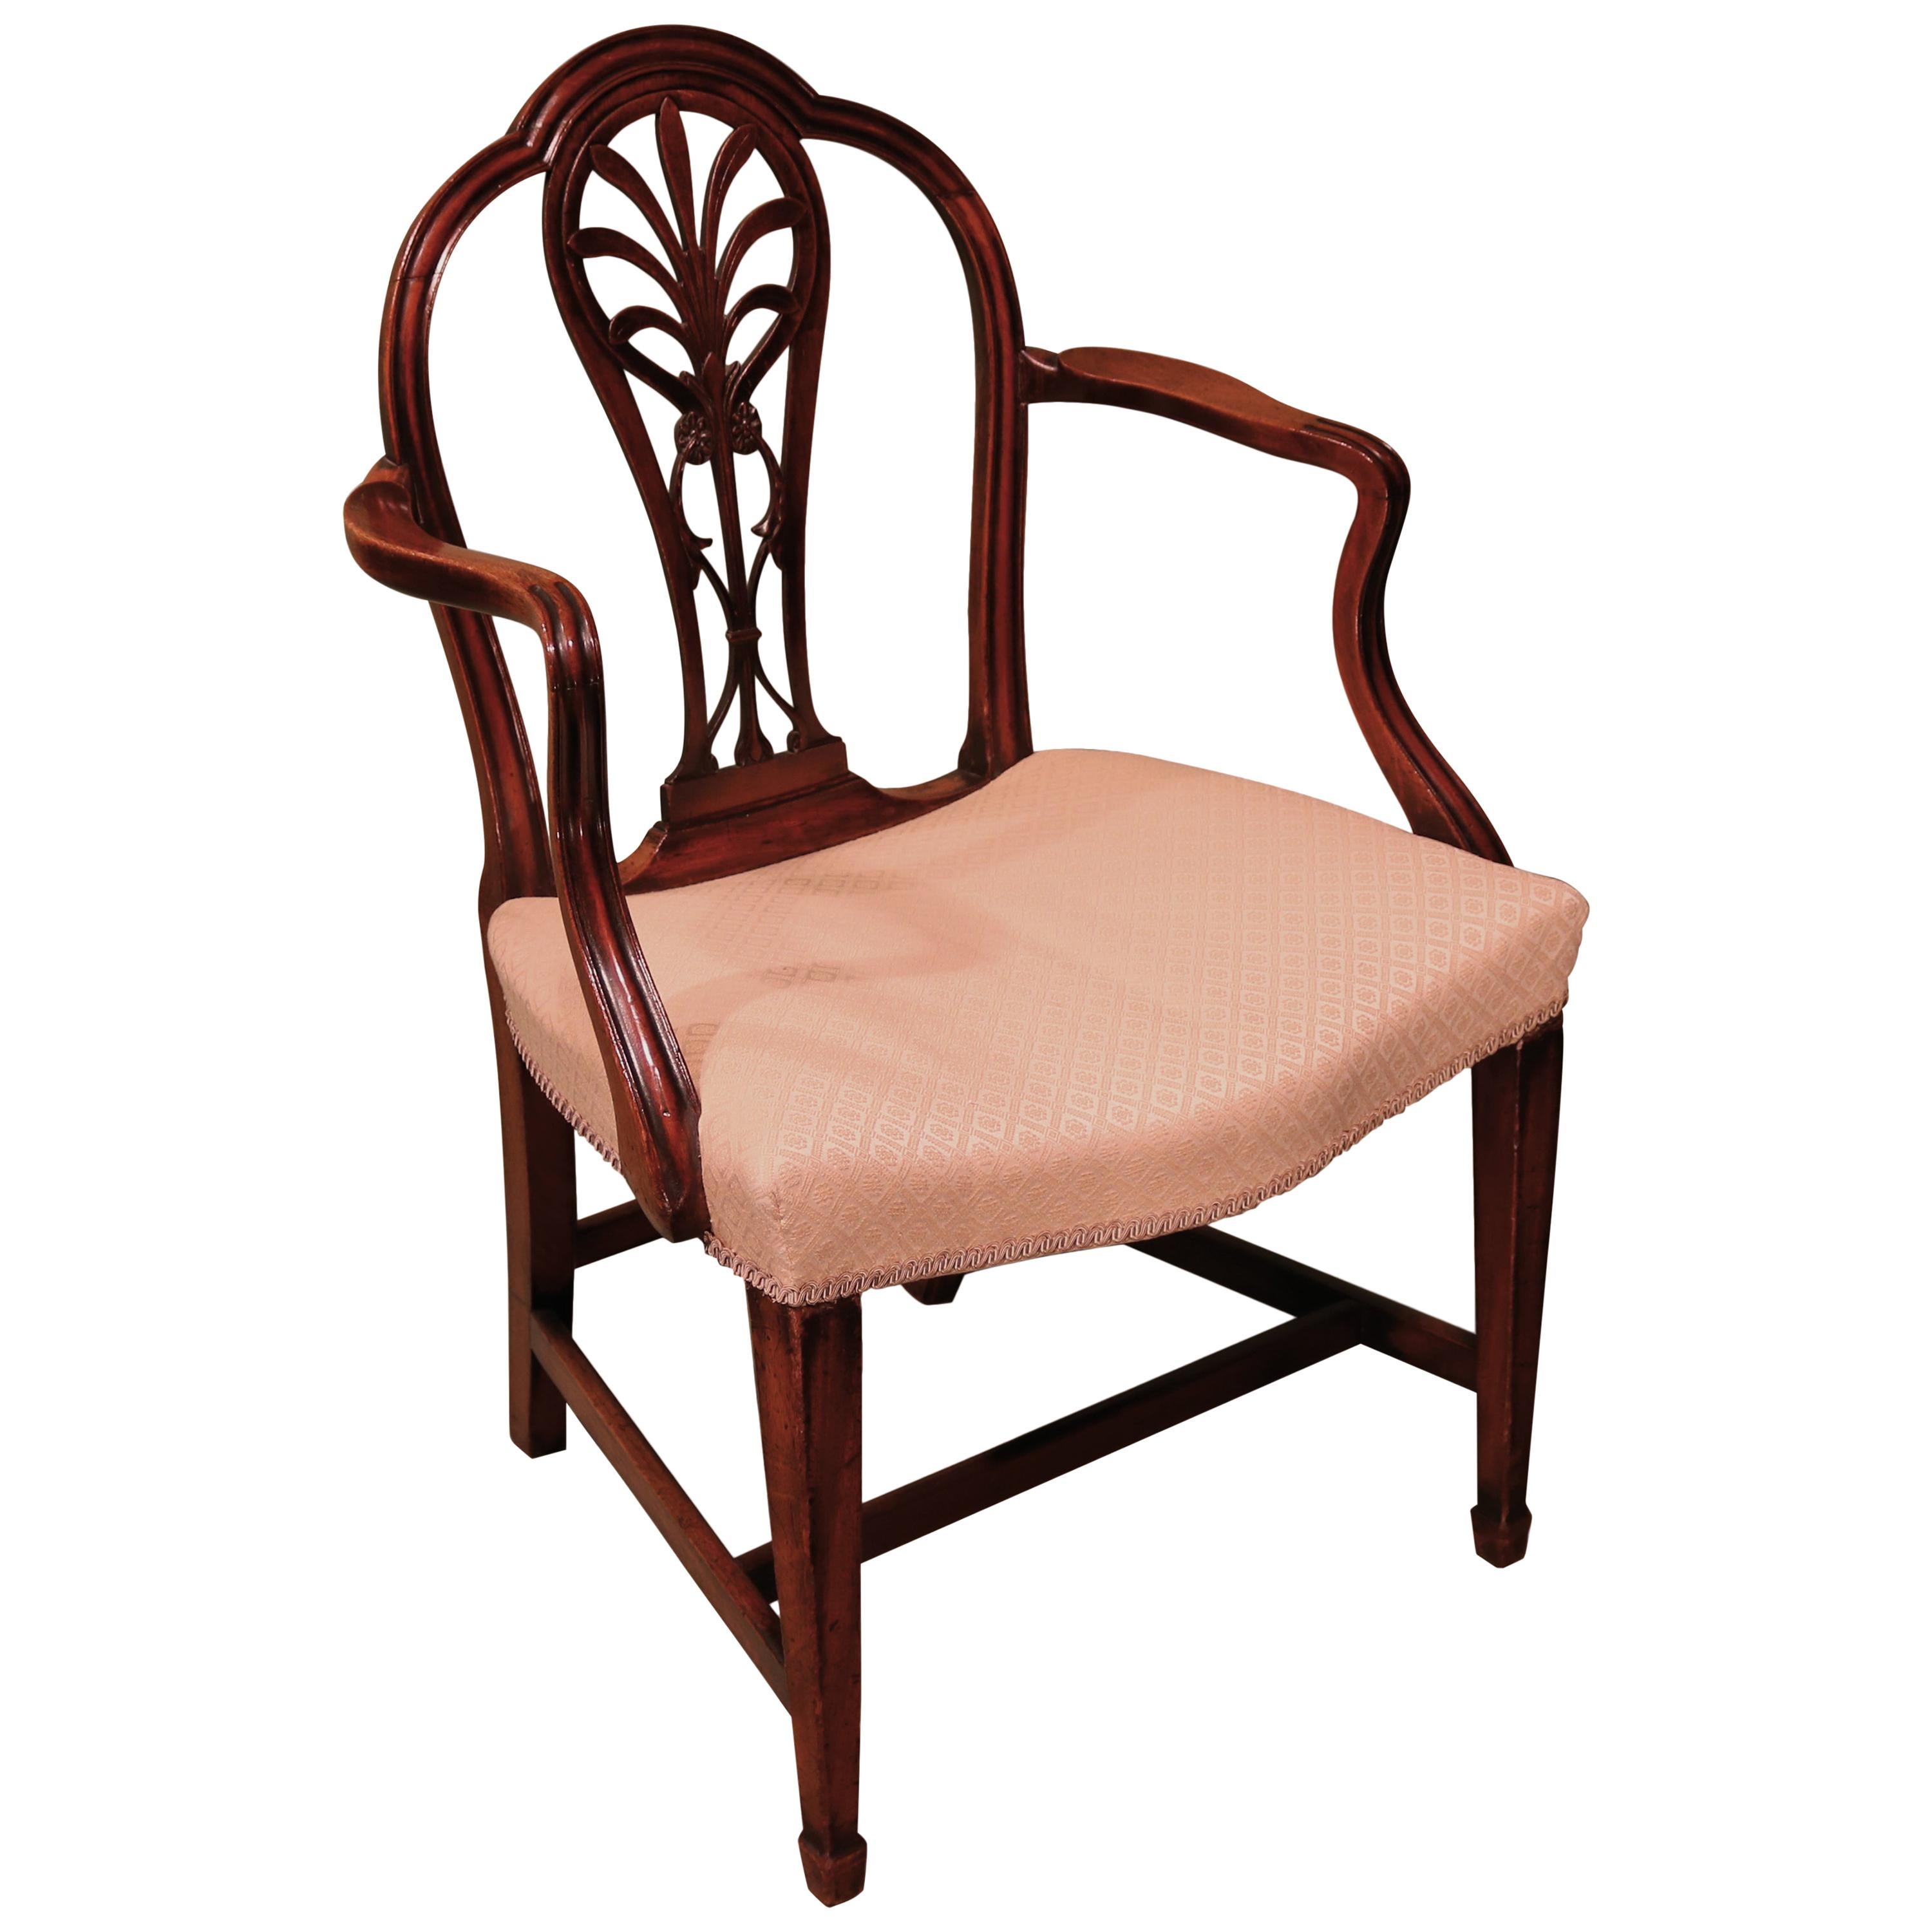 Late 18th Century Mahogany Armchair with Carved Back